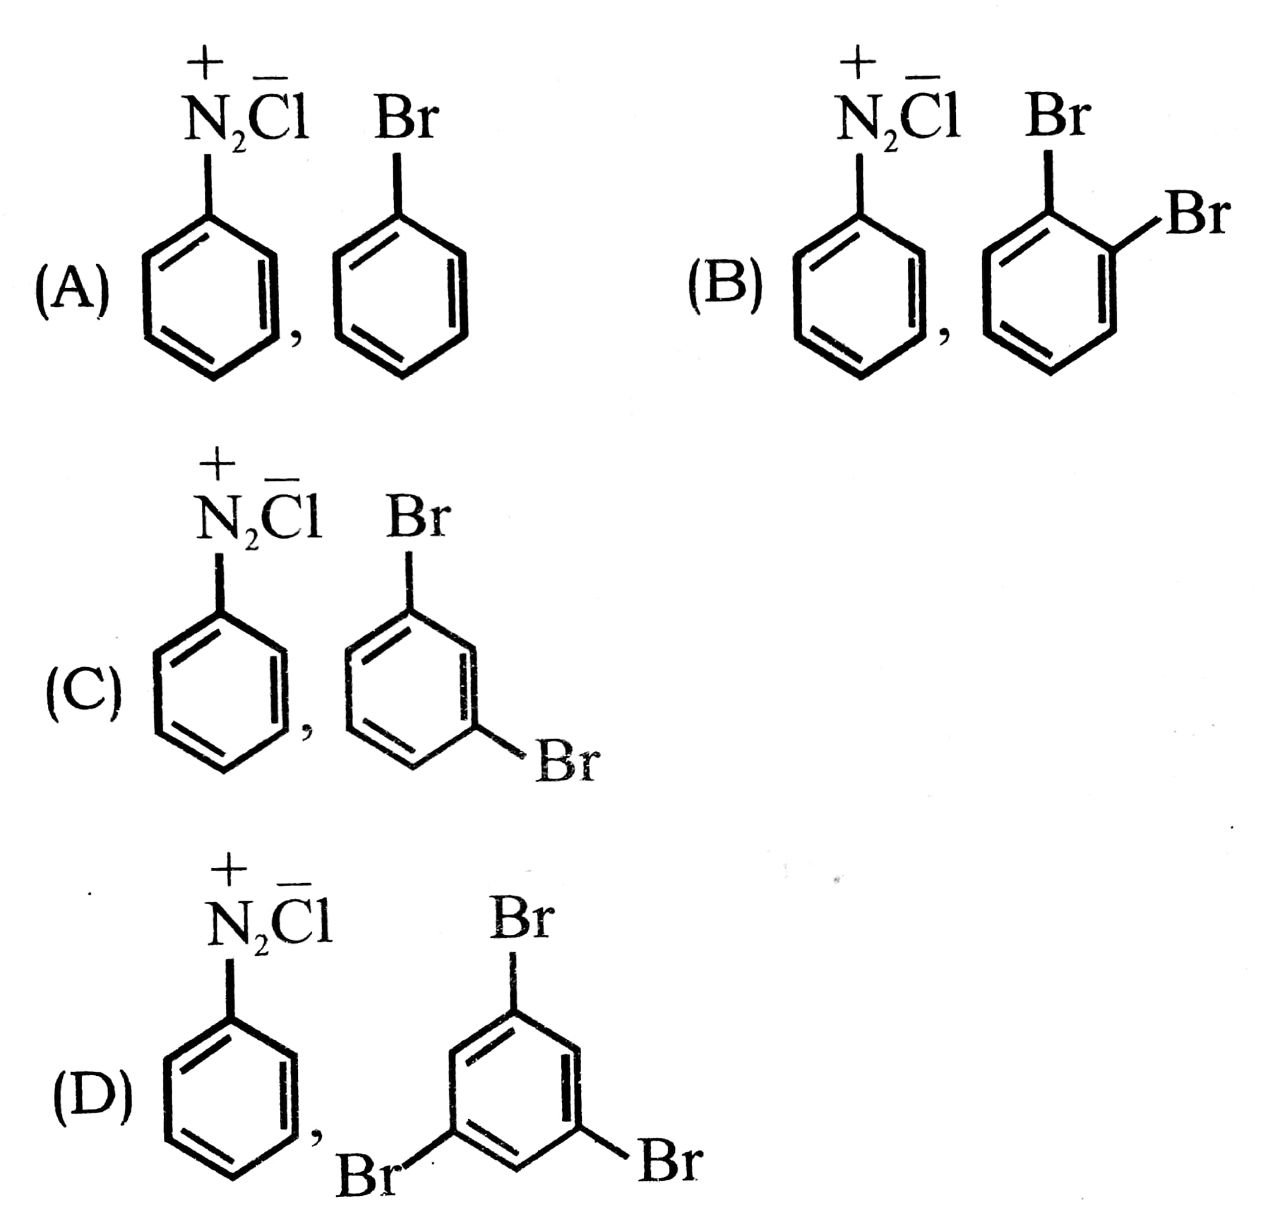 X and Y in the reaction are